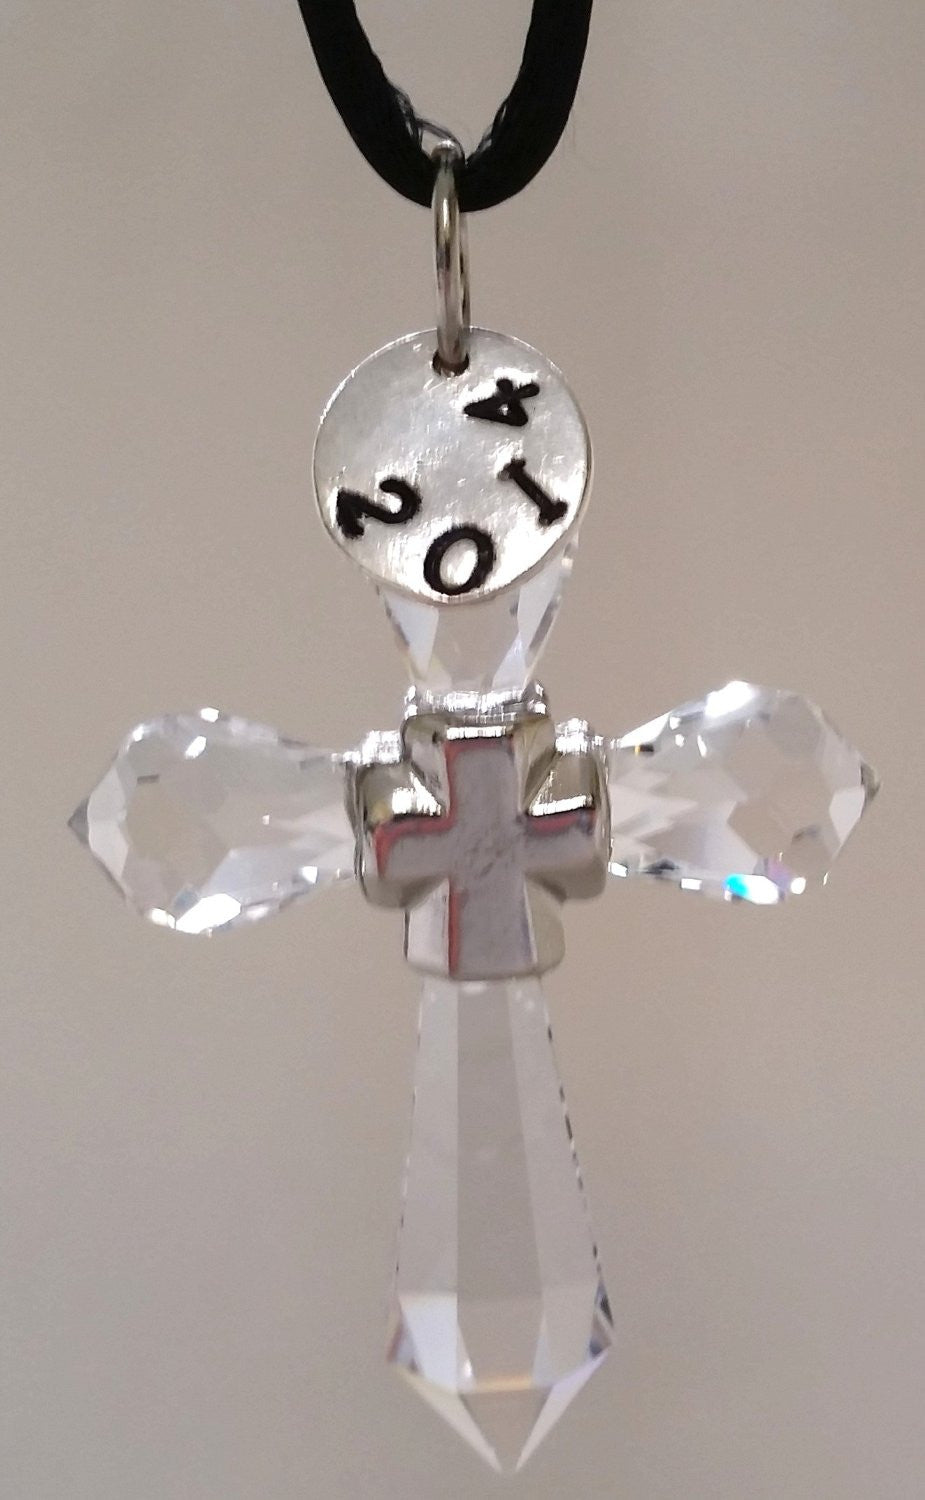 Hanging Crystal Cross Ornament Handcrafted By the Artisans At Bjcrystalgifts Using Swarovski Crystal with Hand Stamped Year